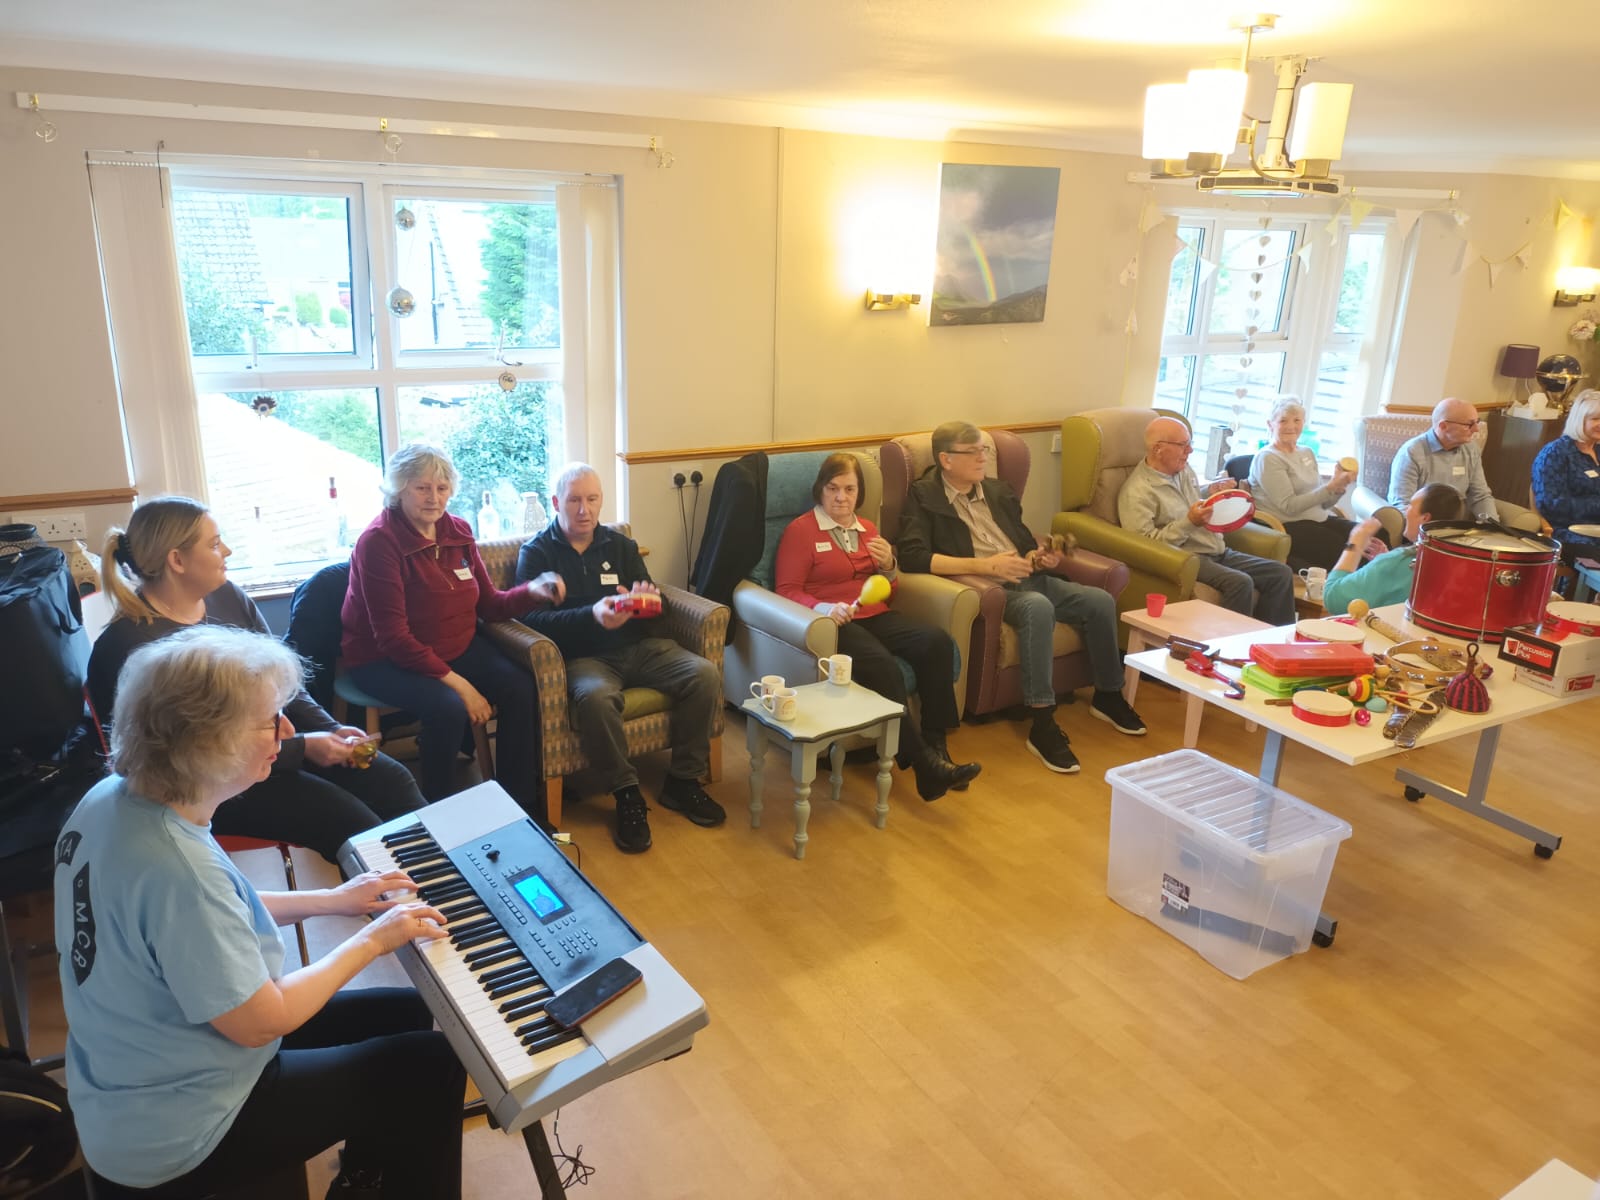 The Music Therapist at Pendleside Hospice